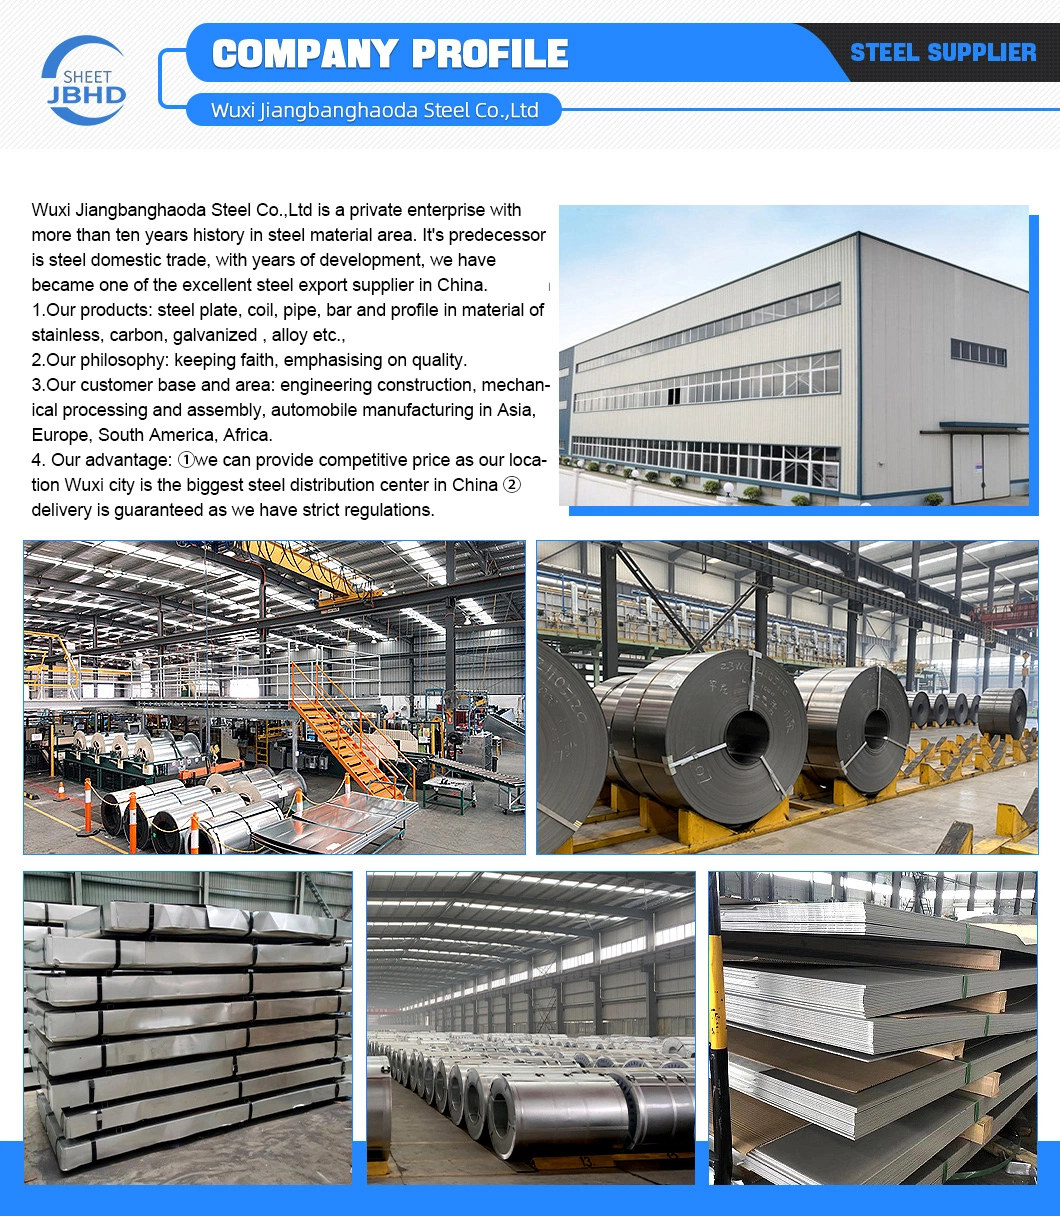 AISI 304 316 Stainless Steel Sheet Mirrored 1mm 2mm 3mm 4mm 5mm 10mm Cr Hr 4X8 Ss 201 301 304L 347 310 312 316L Metal Steel Ss Sheet Price Per Kg Manufacturing